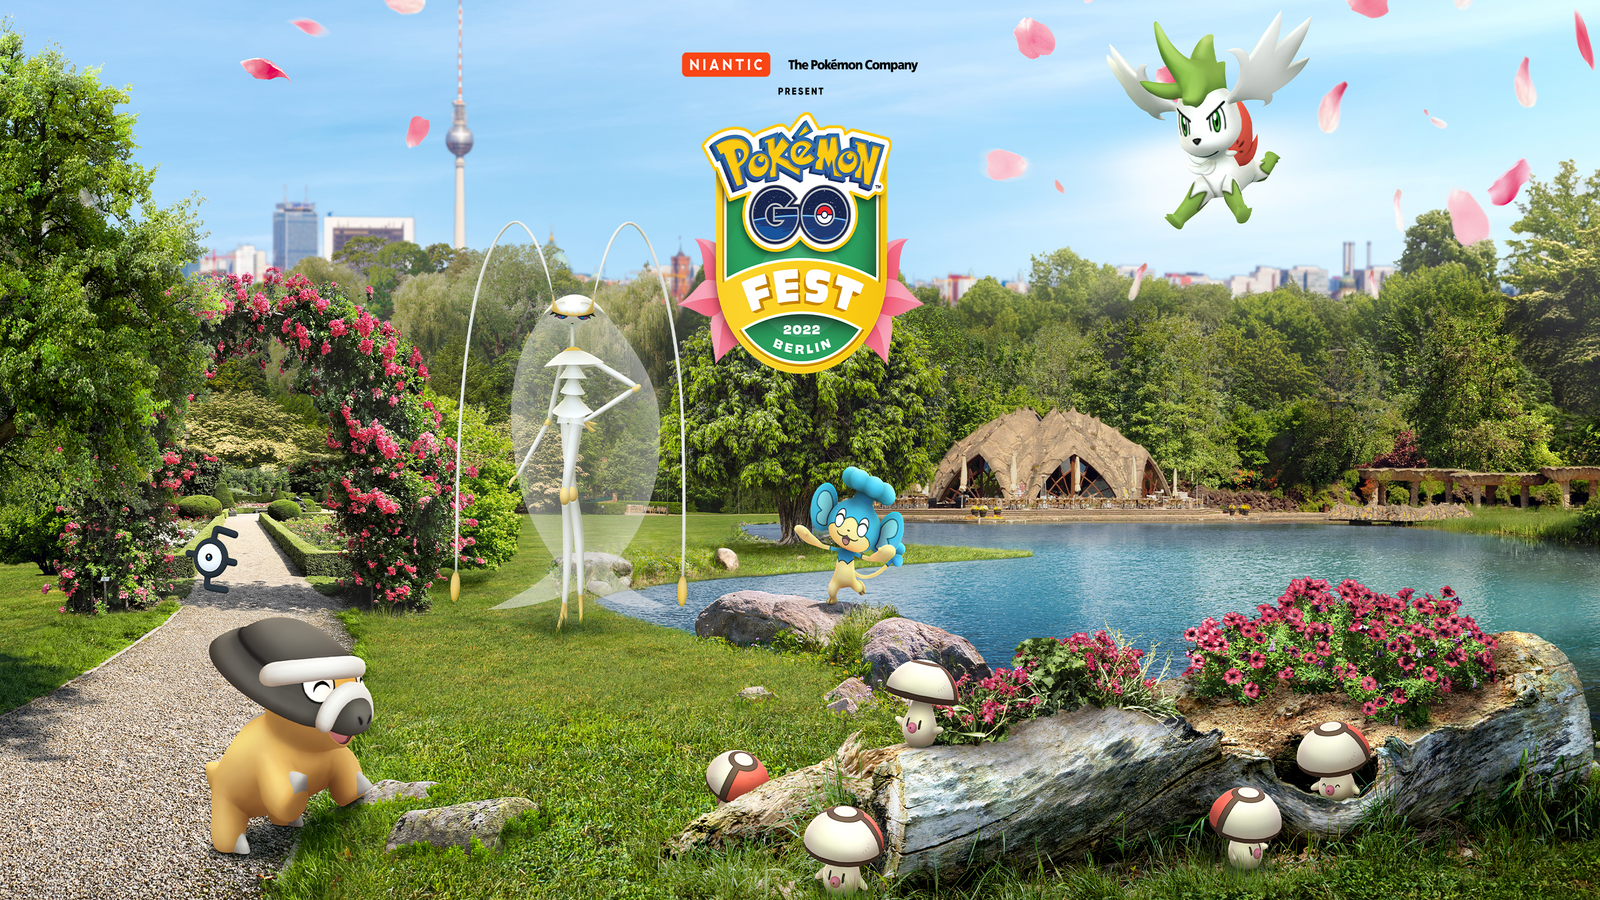 Adventure Awaits during the Out to Play Event! – Pokémon GO